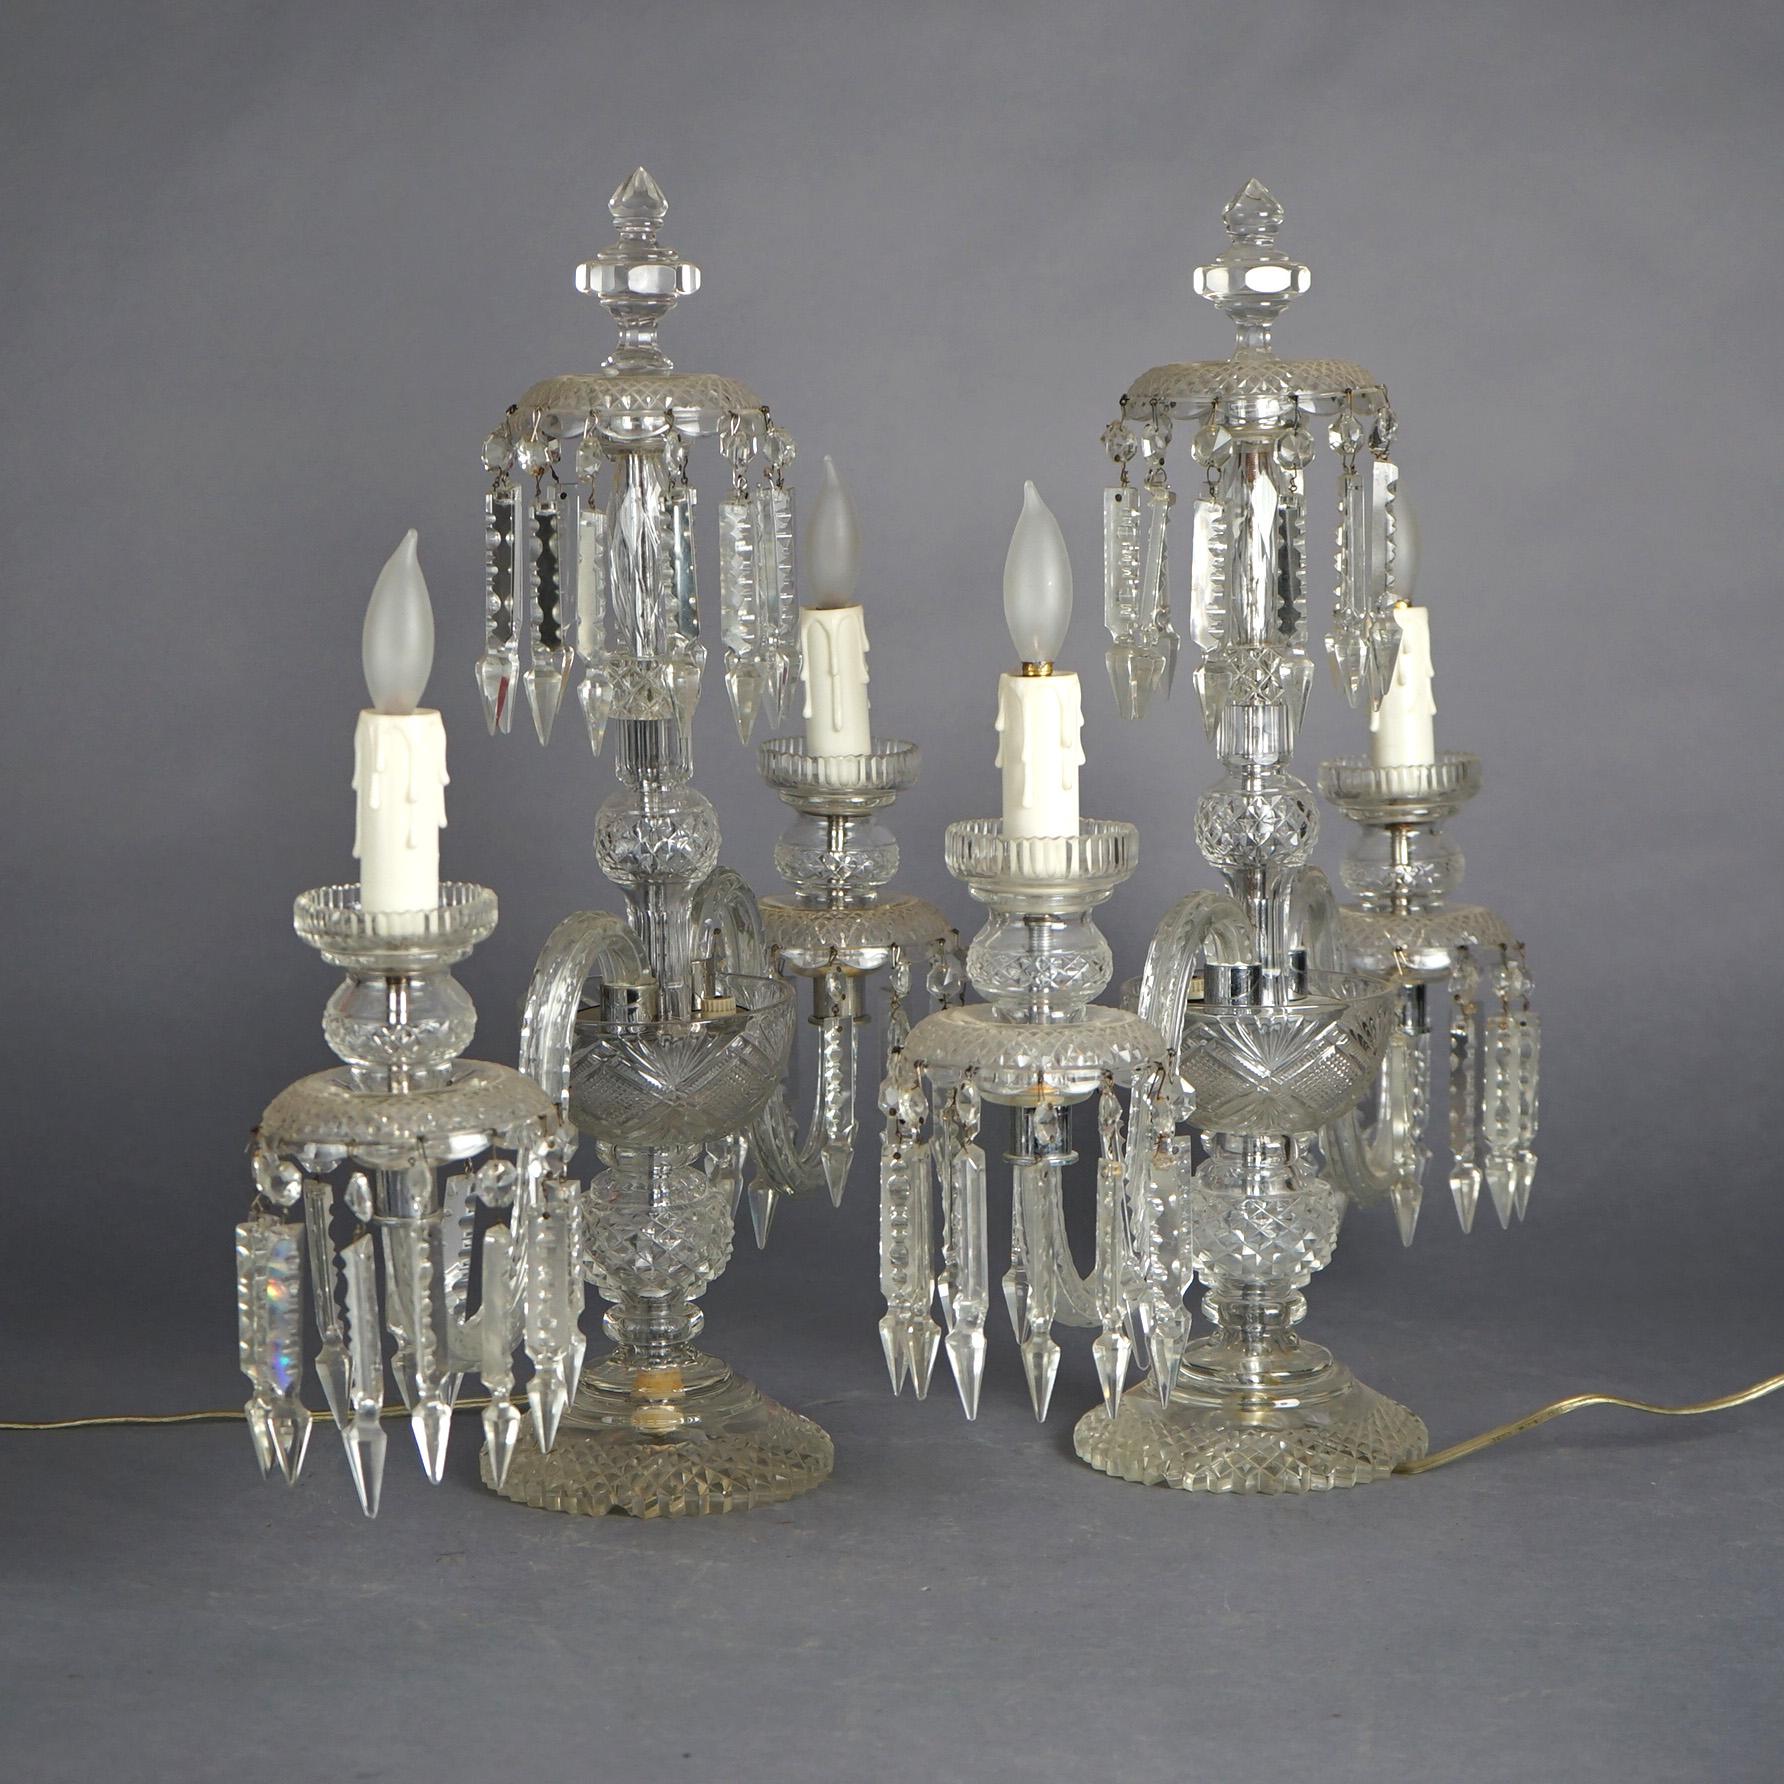 American Antique Matching Pair of Cut Glass & Crystal Candelabra Table Lamps Circa 1920